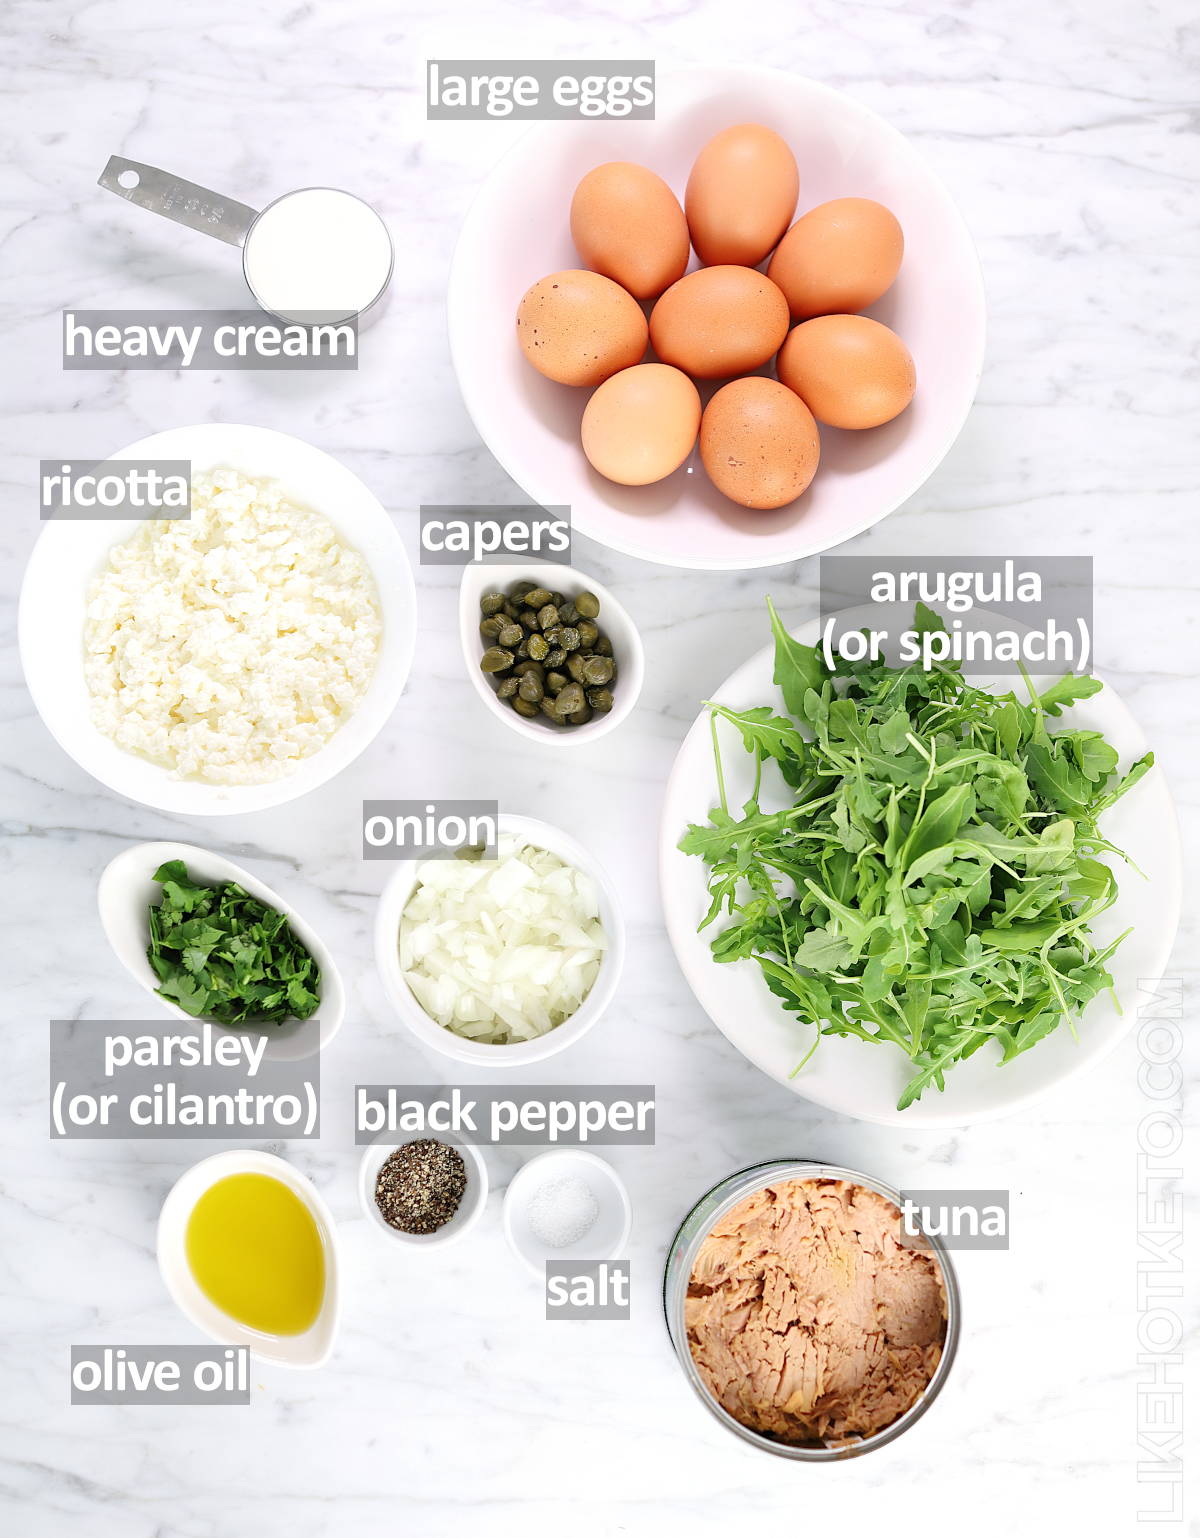 List of ingredients for the keto tuna frittata: eggs, heavy cream, ricotta, capers, arugula or spinach, onion, parsley or cilantro, salt, black pepper, olive oil and canned tuna.